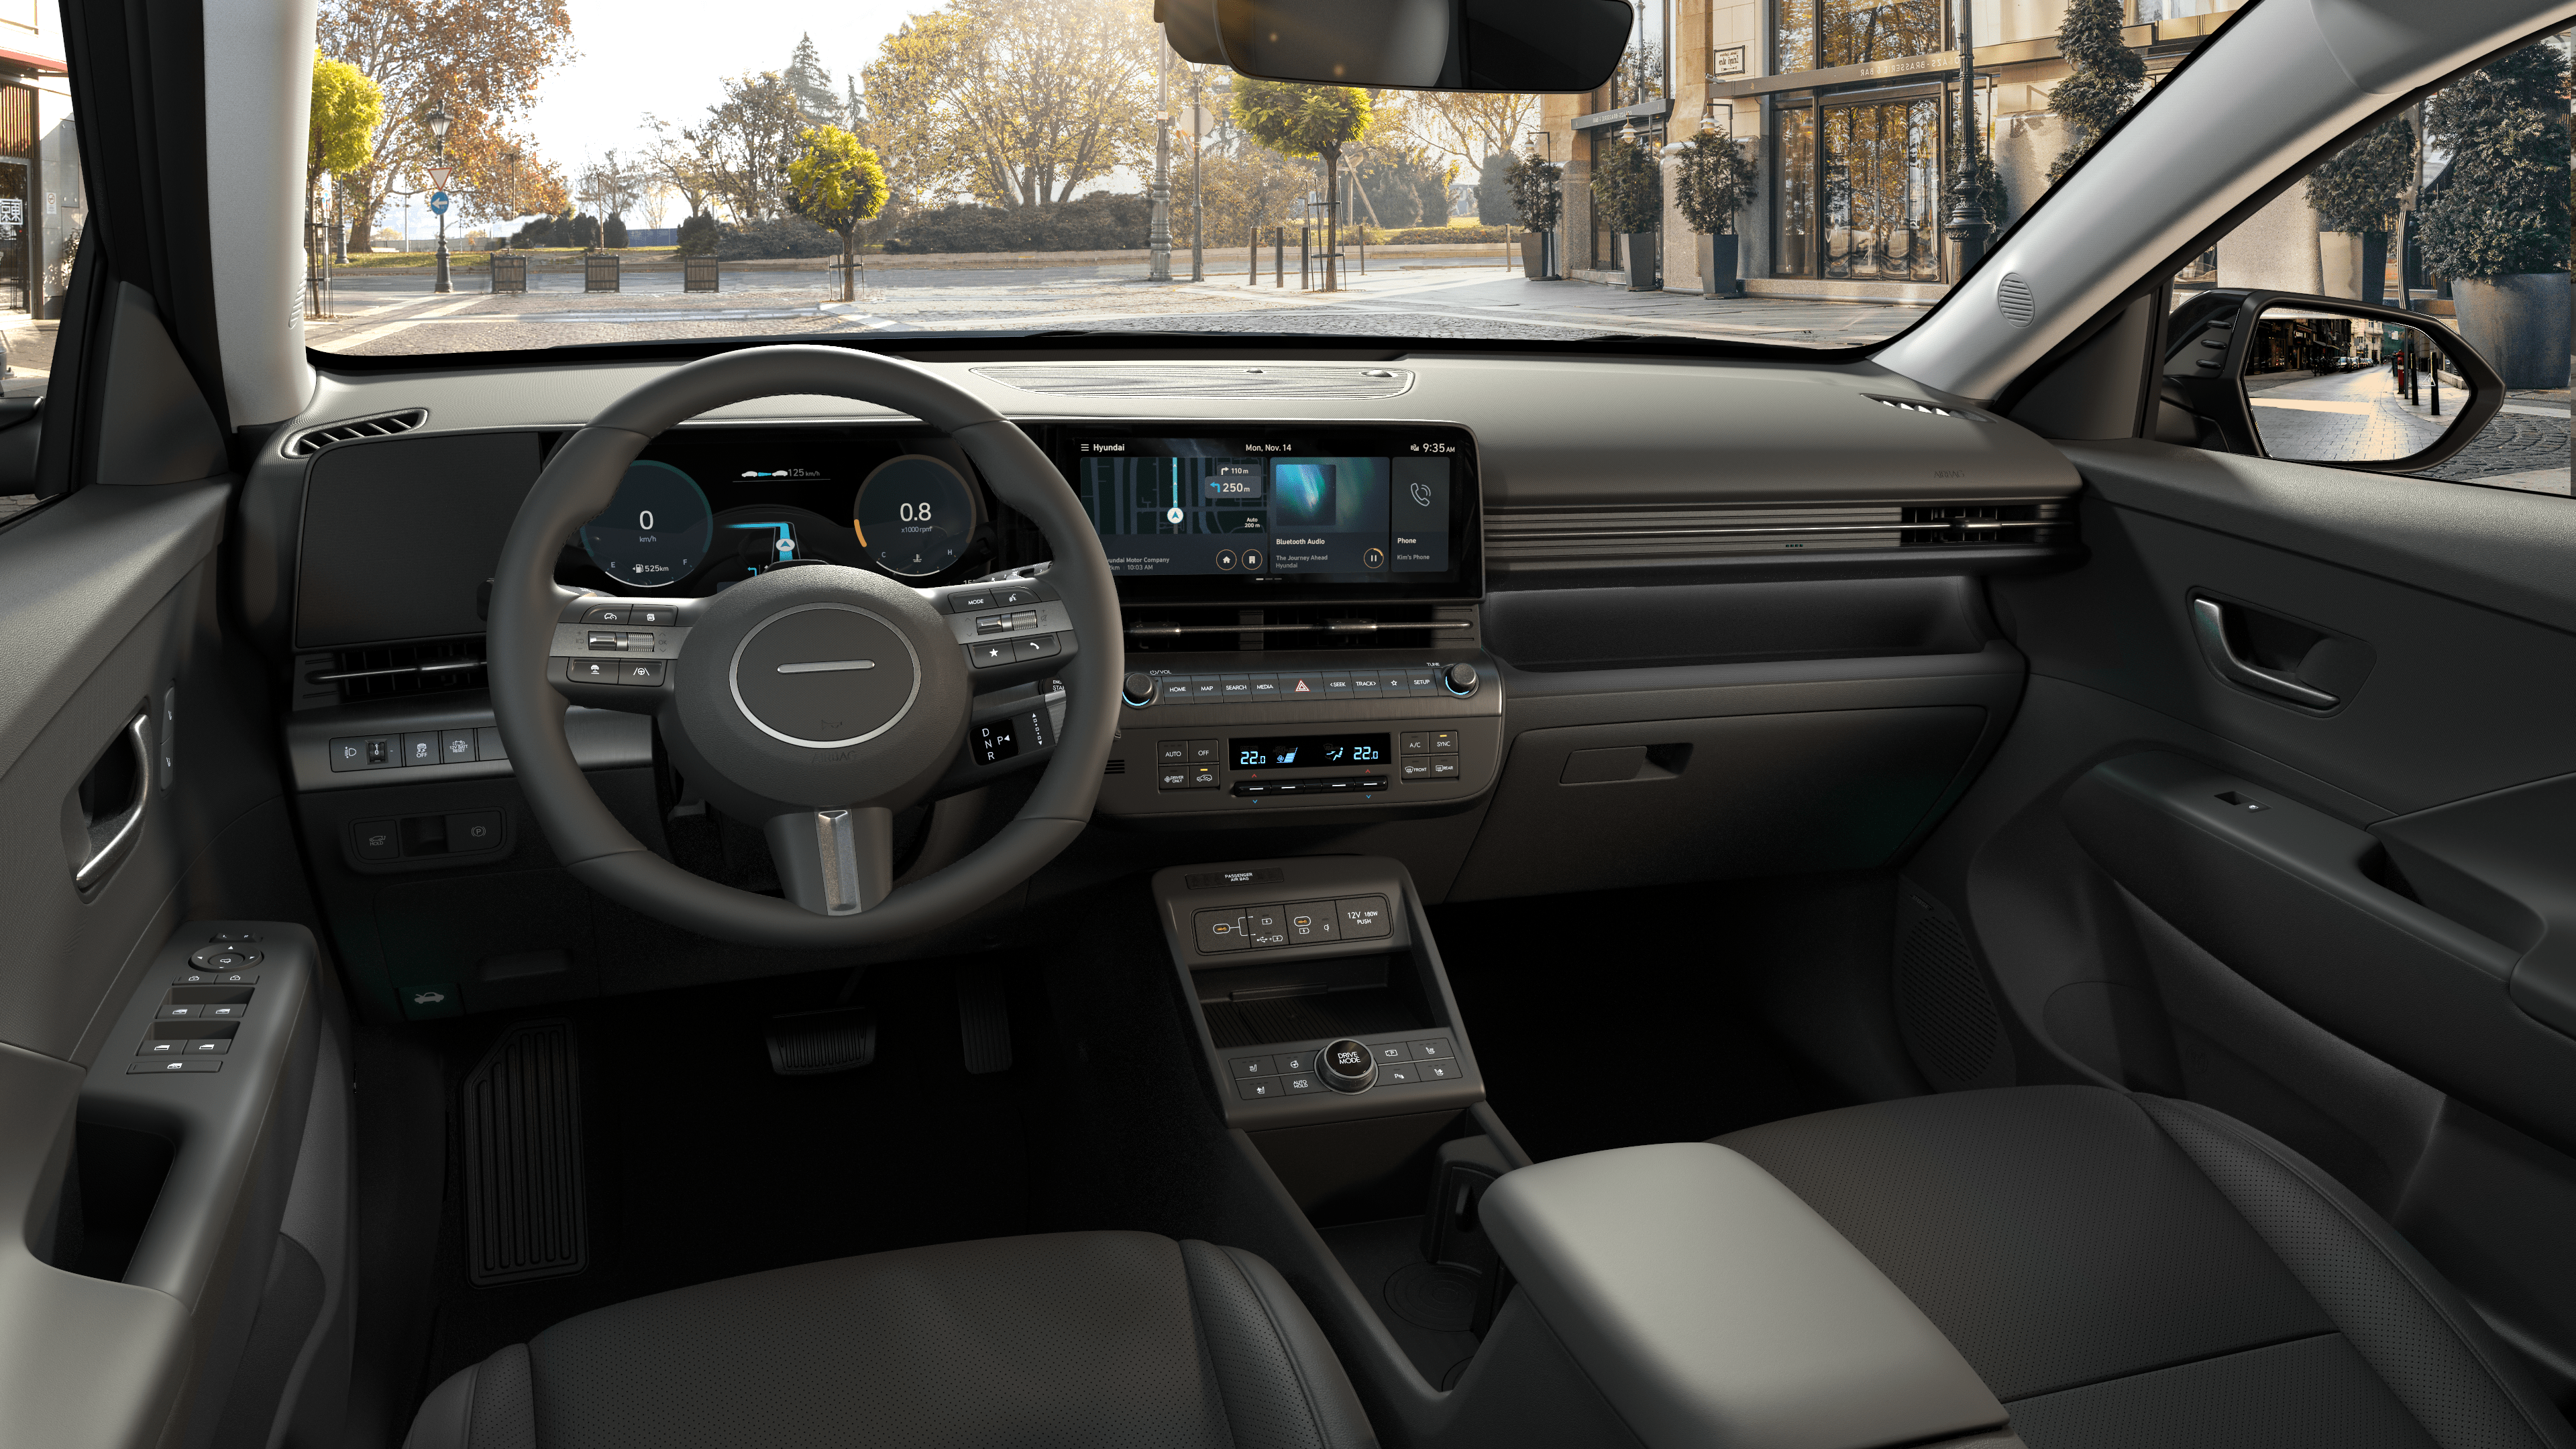 The cockpit of the Hyundai KONA SUV with dual screen panoramic display and ambient lighting.